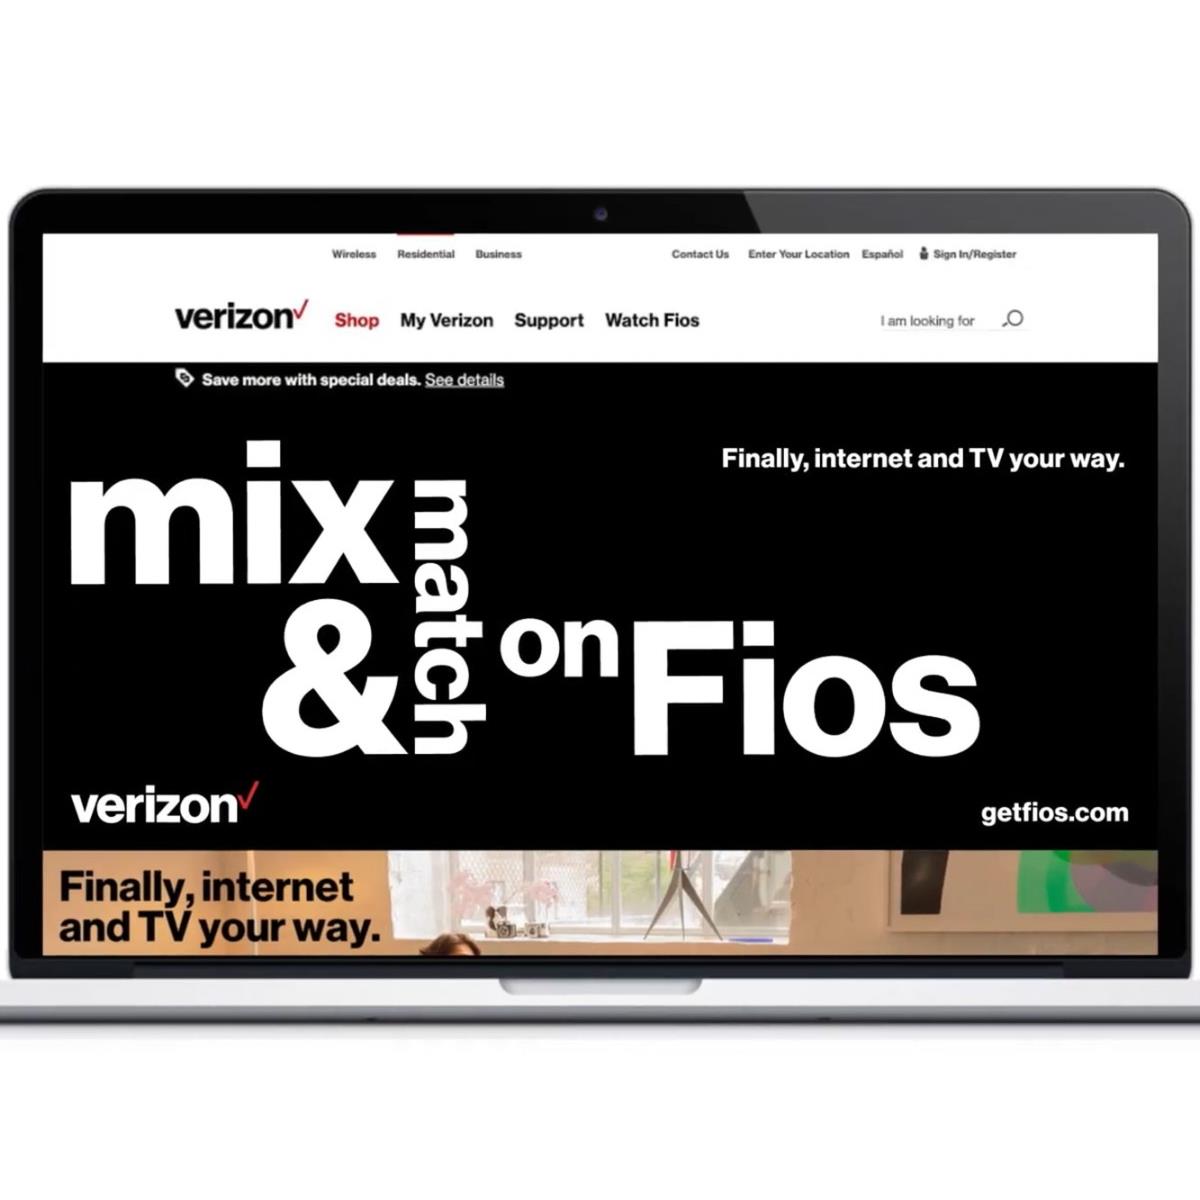 Verizon Ends Fios Bundles and Contracts With 'Mix & Match' Pricing